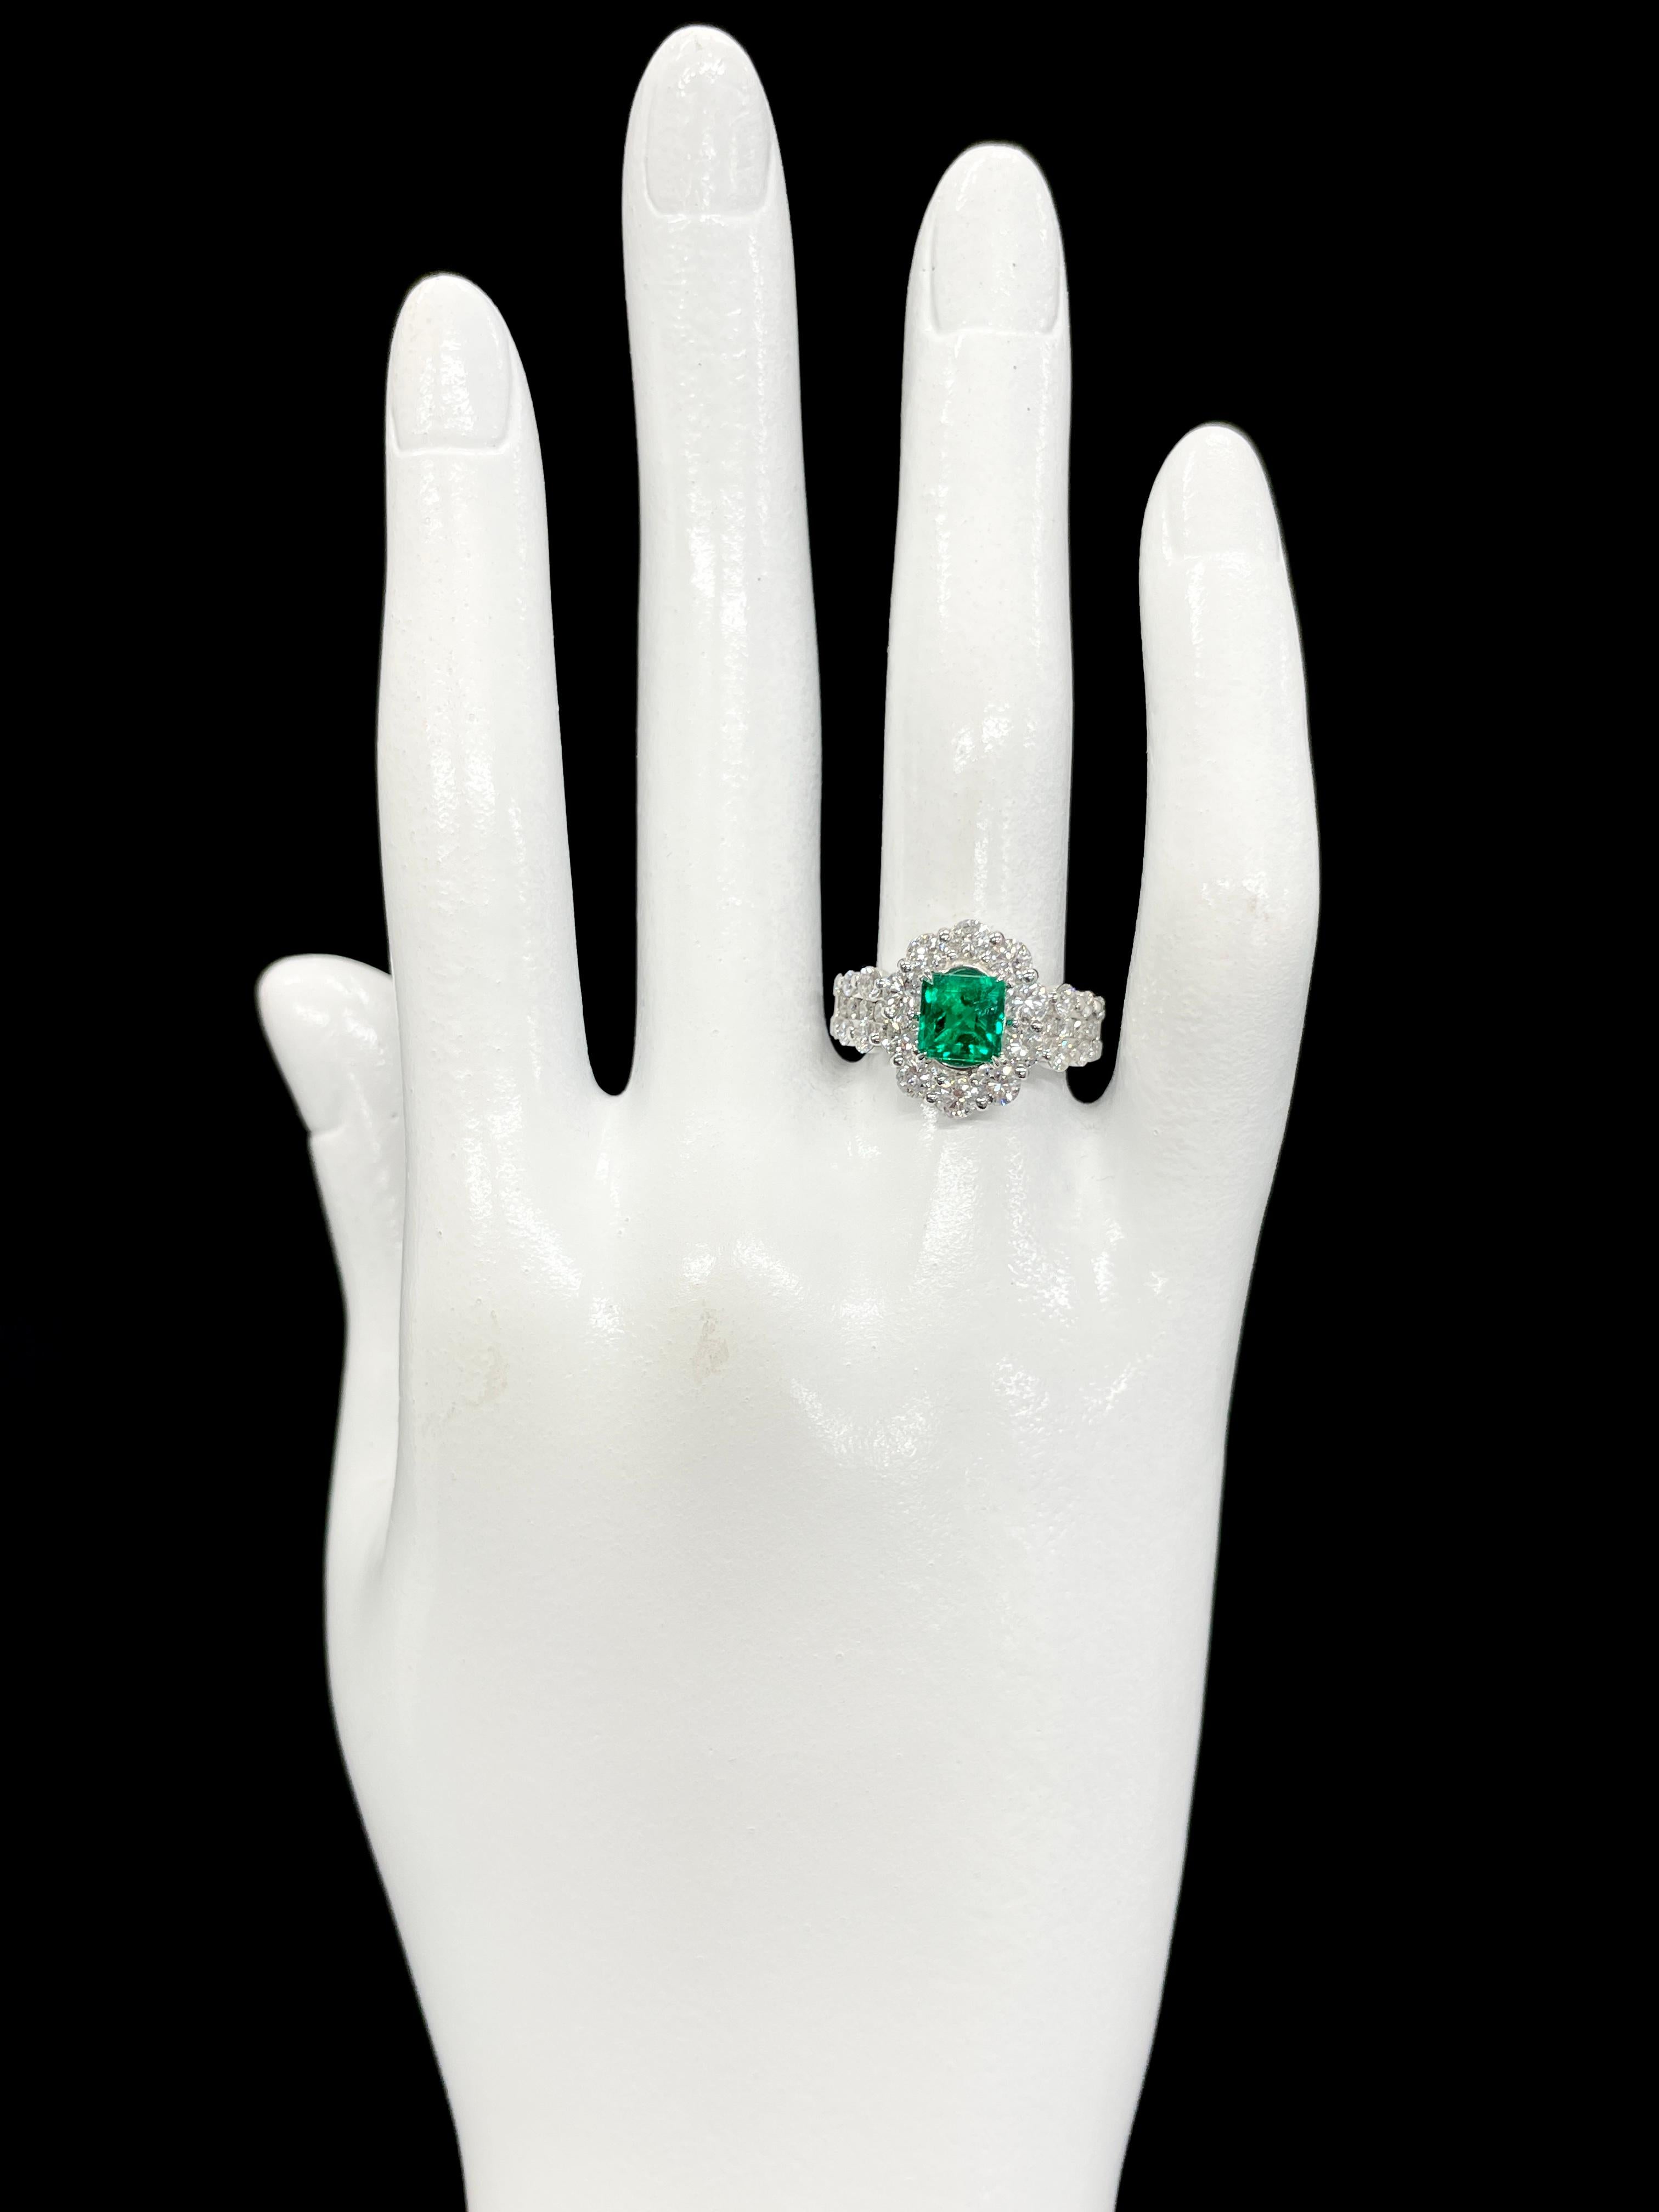 2.19 Carat Natural Colombian Emerald and Diamond Ring Set in Platinum For Sale 1